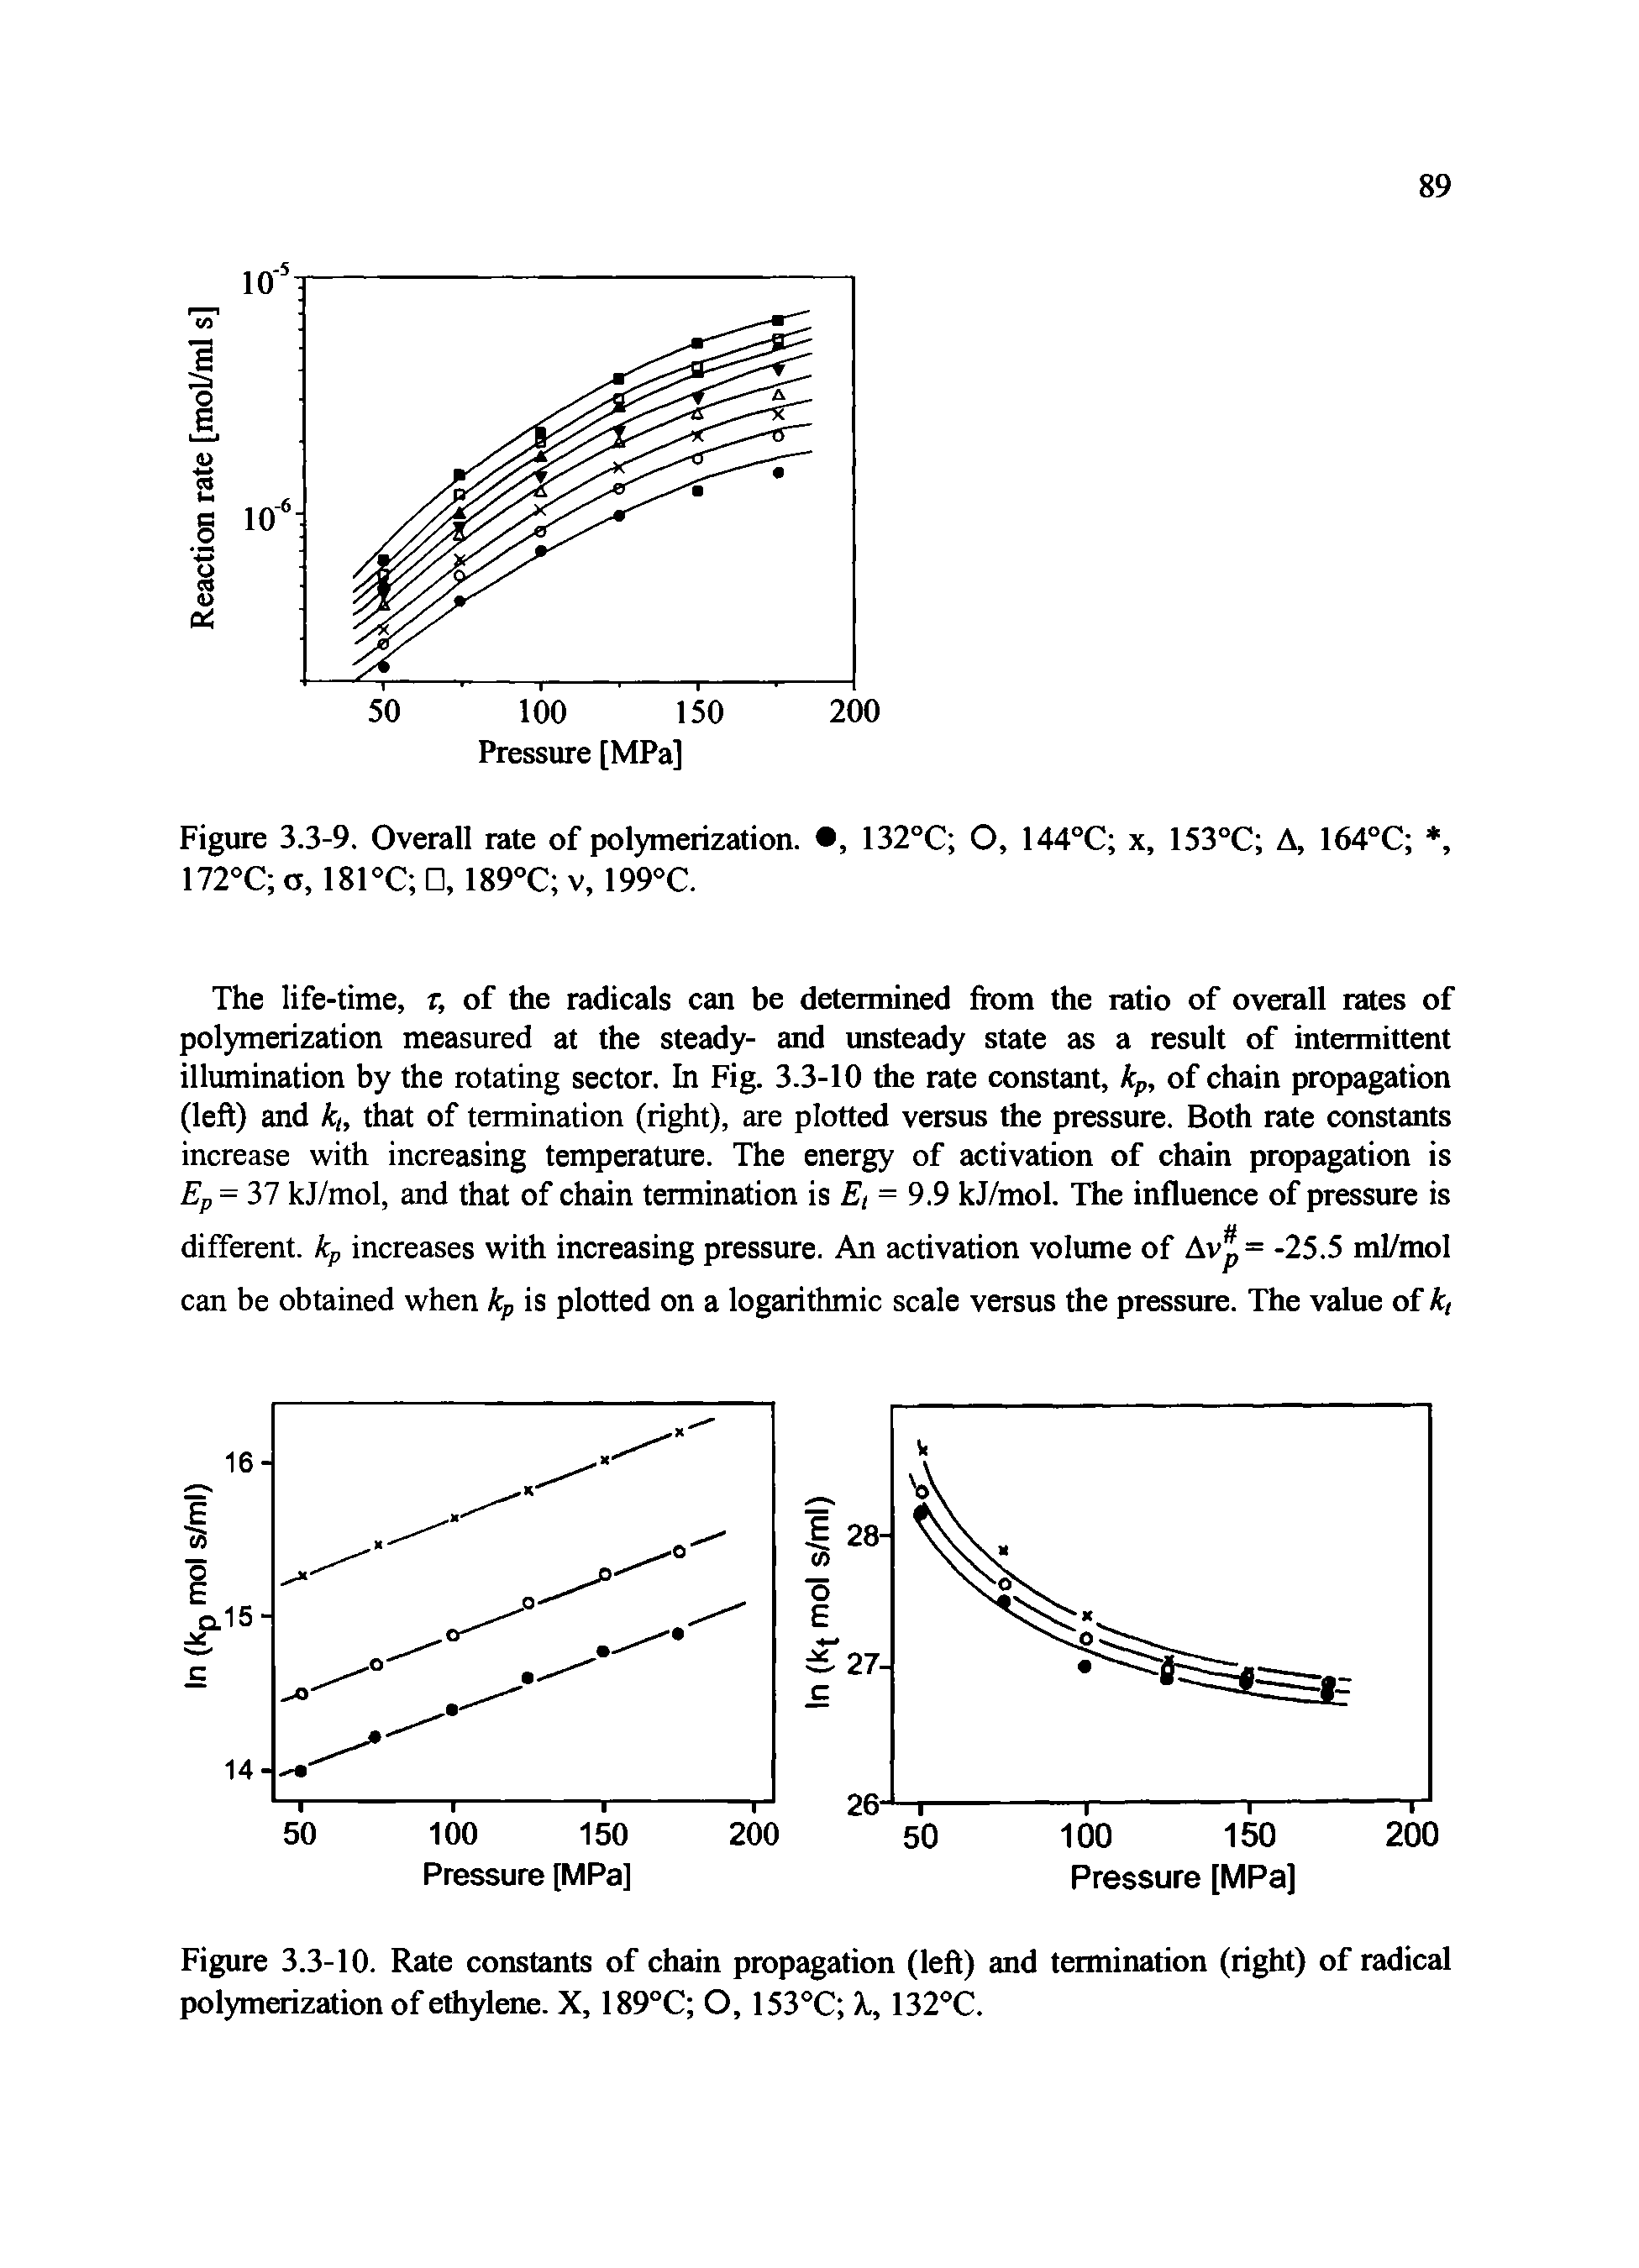 Figure 3.3-10. Rate constants of chain propagation (left) and termination (right) of radical polymerization of ethylene. X, 189°C O, 153°C X, 132°C.